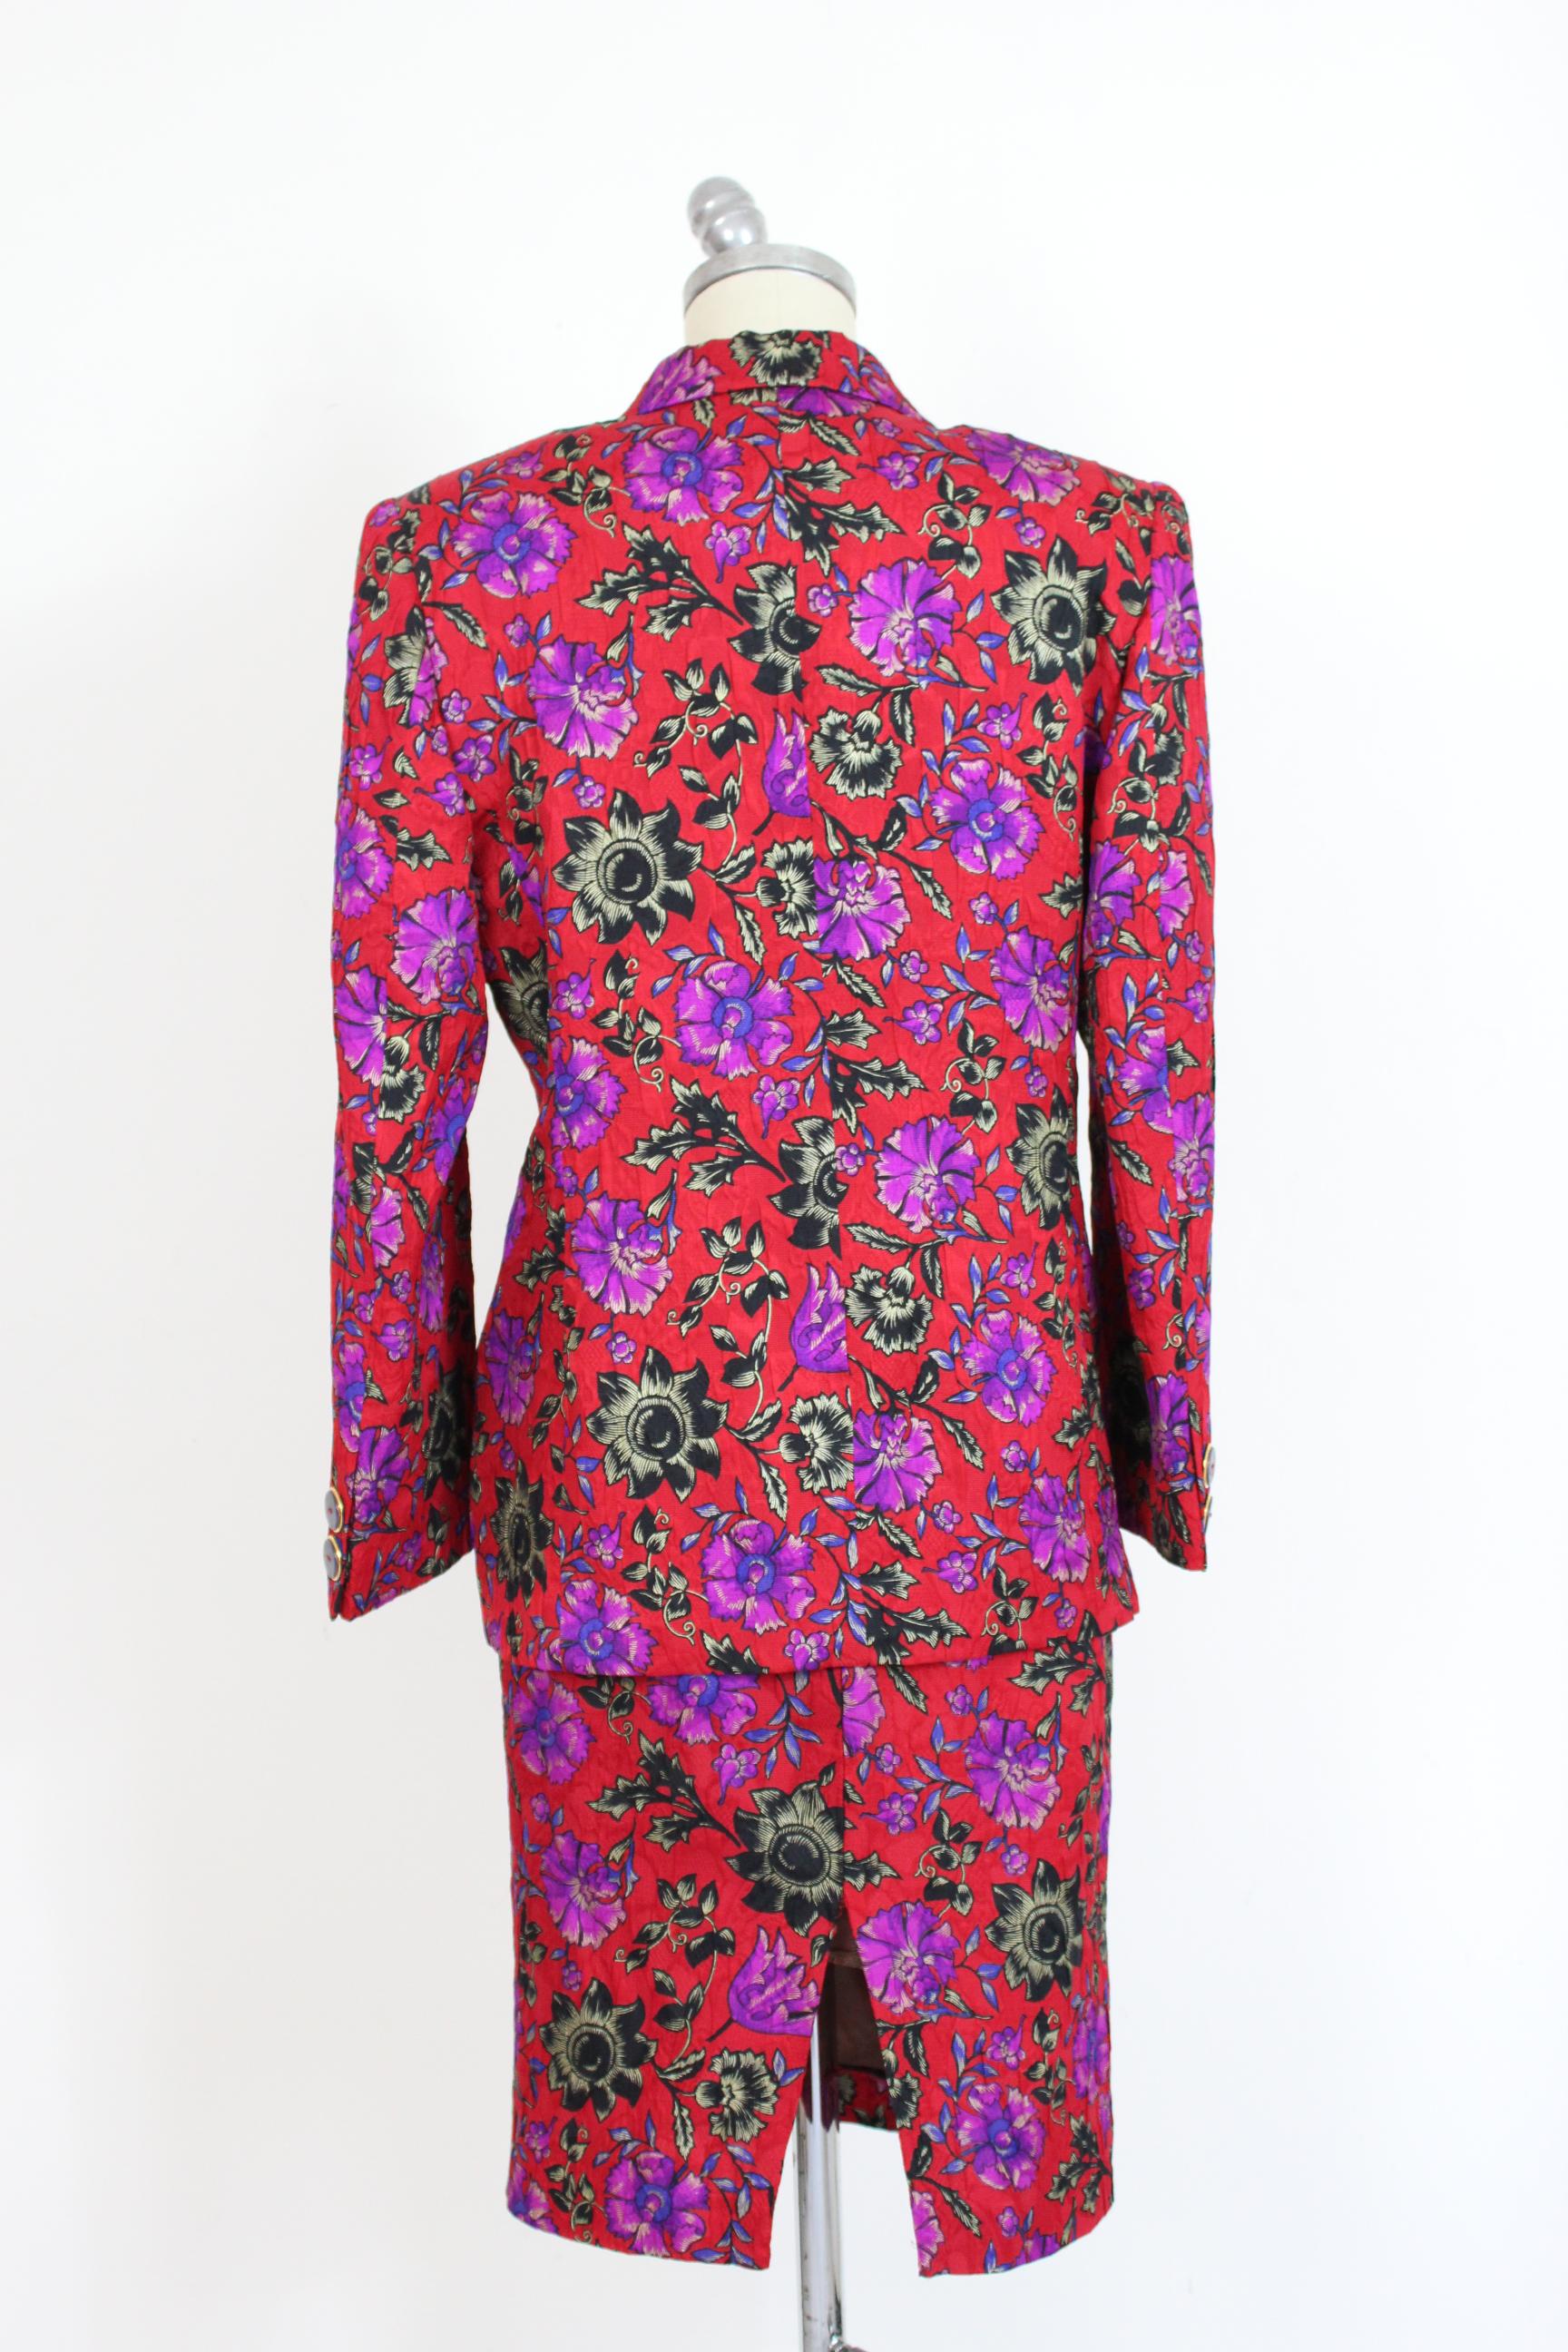 Renato Balestra via Sistina 67 elegant 80s vintage women's suit skirt. Red jacket and skirt with purple and blue floral designs. 100% wool. Made in Italy. Excellent vintage conditions.

Size: 44 It 10 Us 12 Uk

Shoulder: 48 cm

Bust / Chest: 53